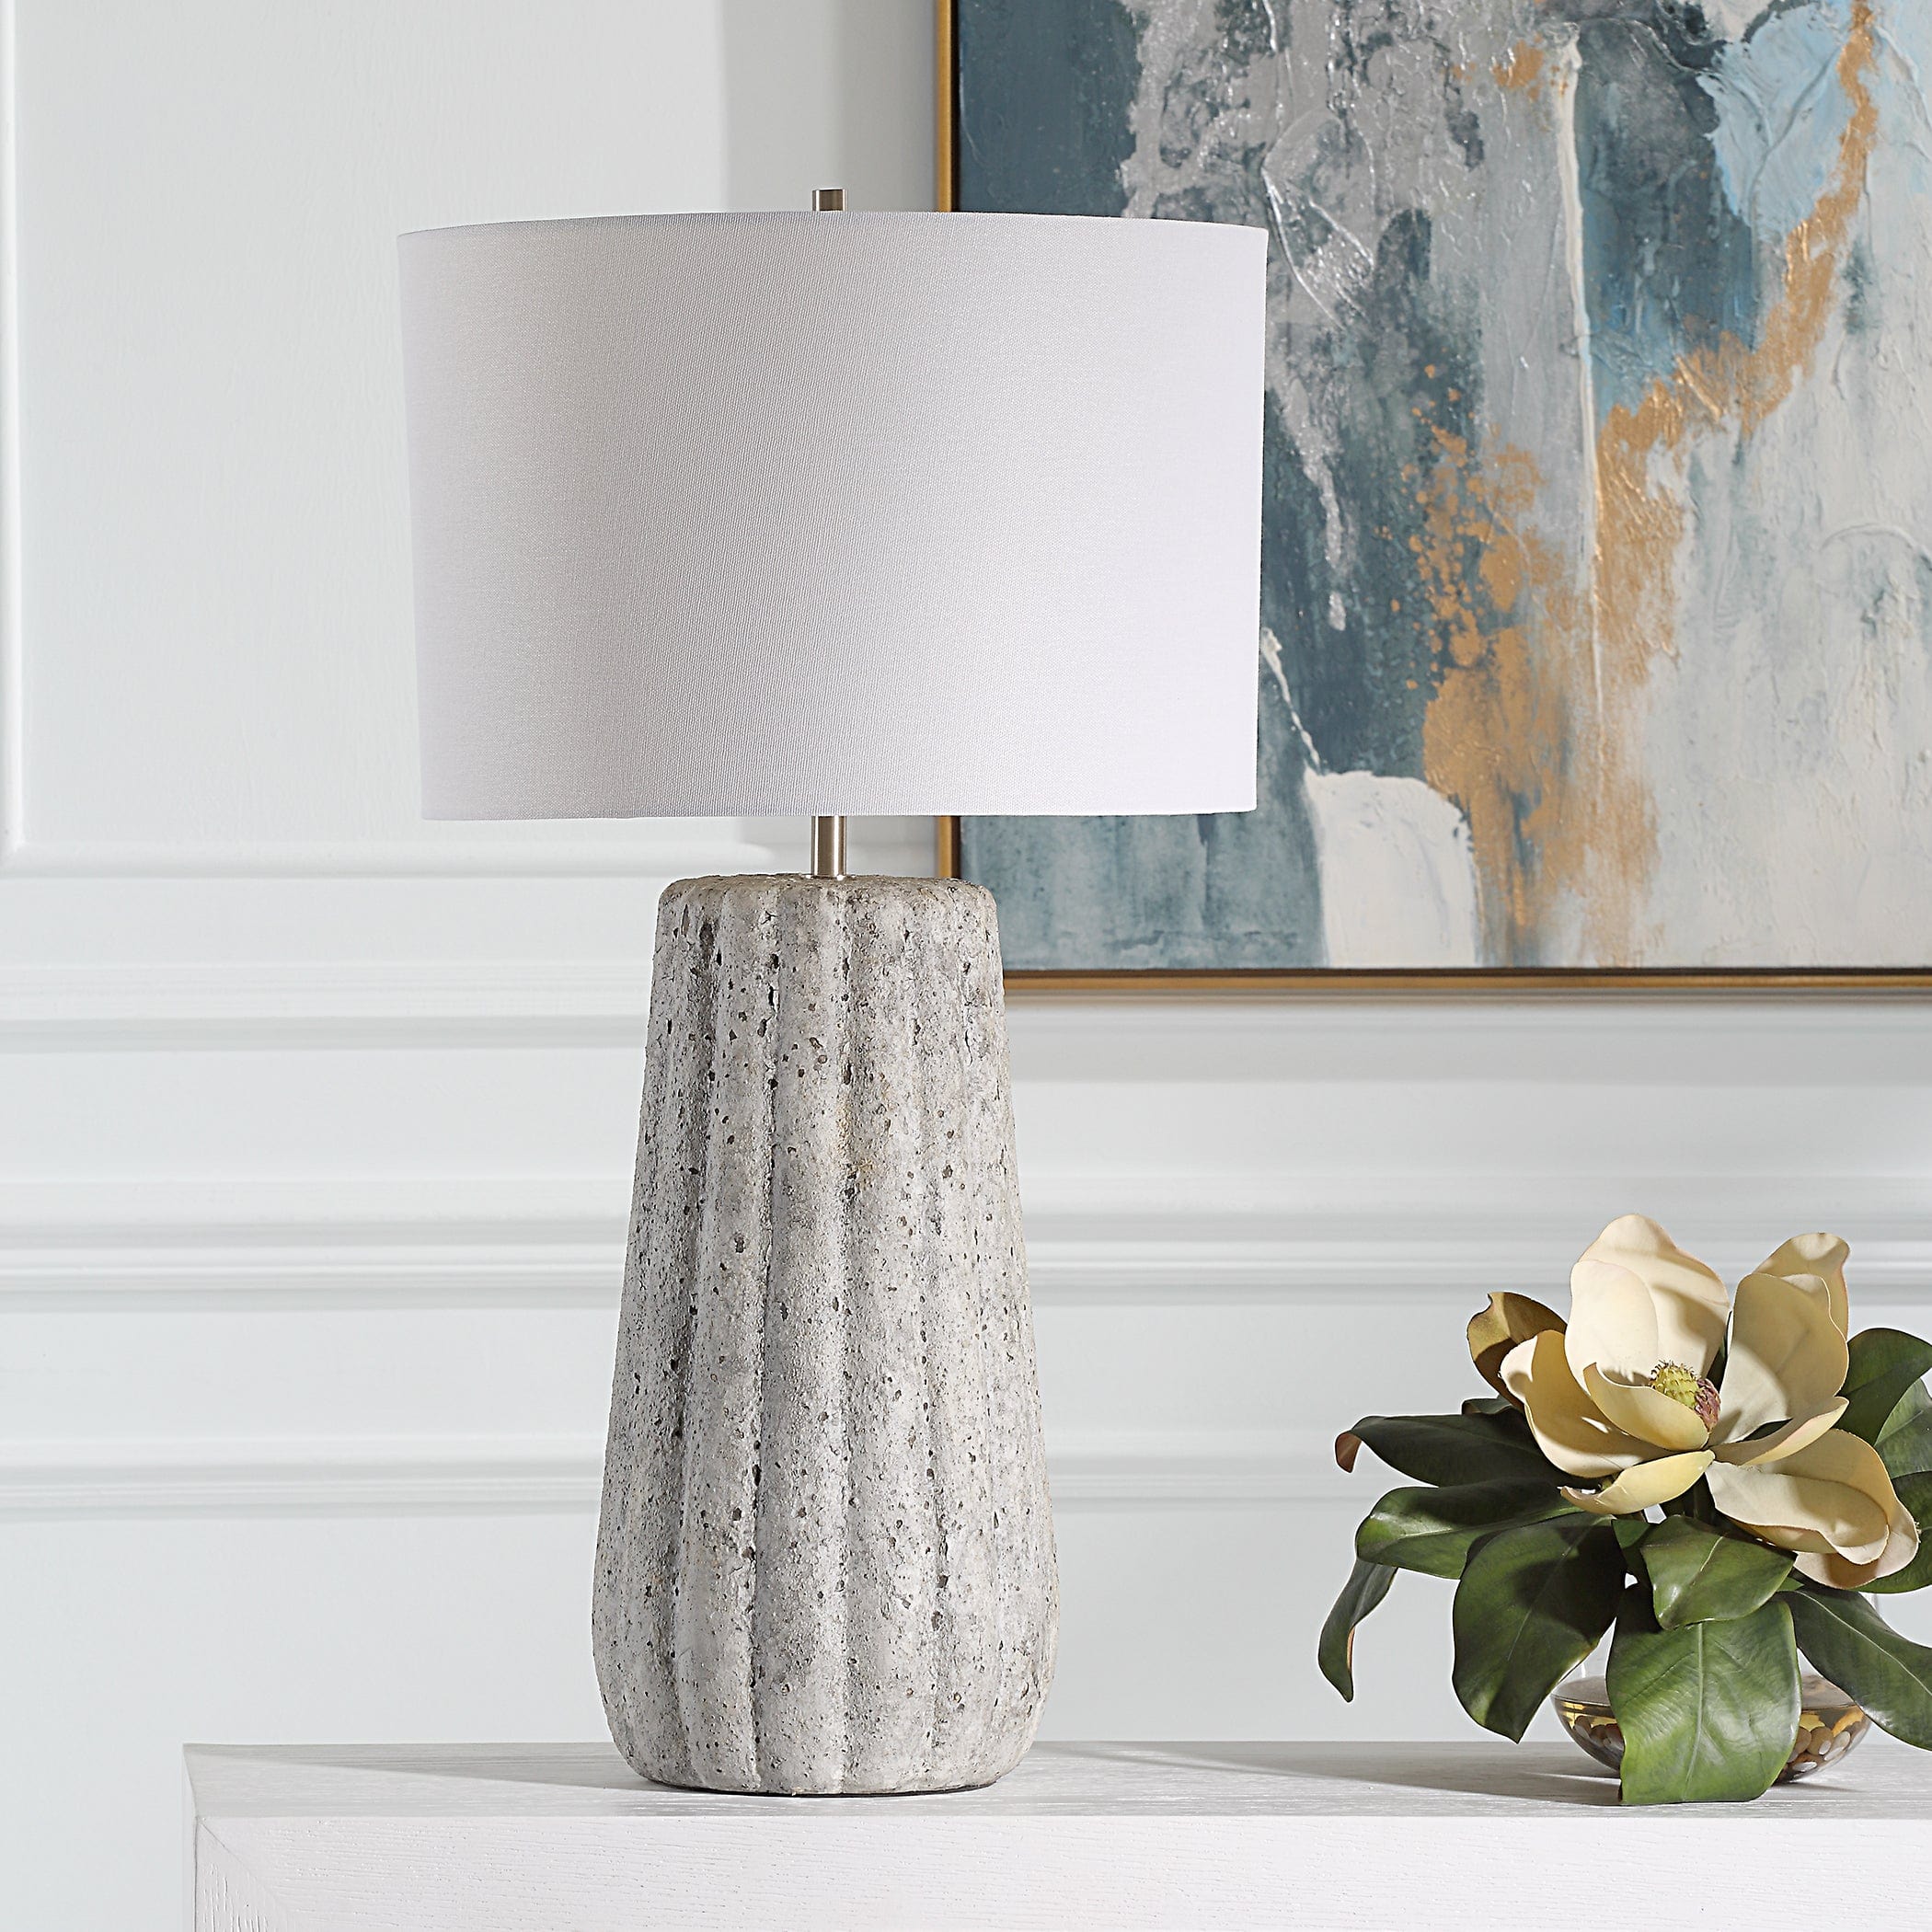 TABLE LAMP-W26132-1 Uttermost